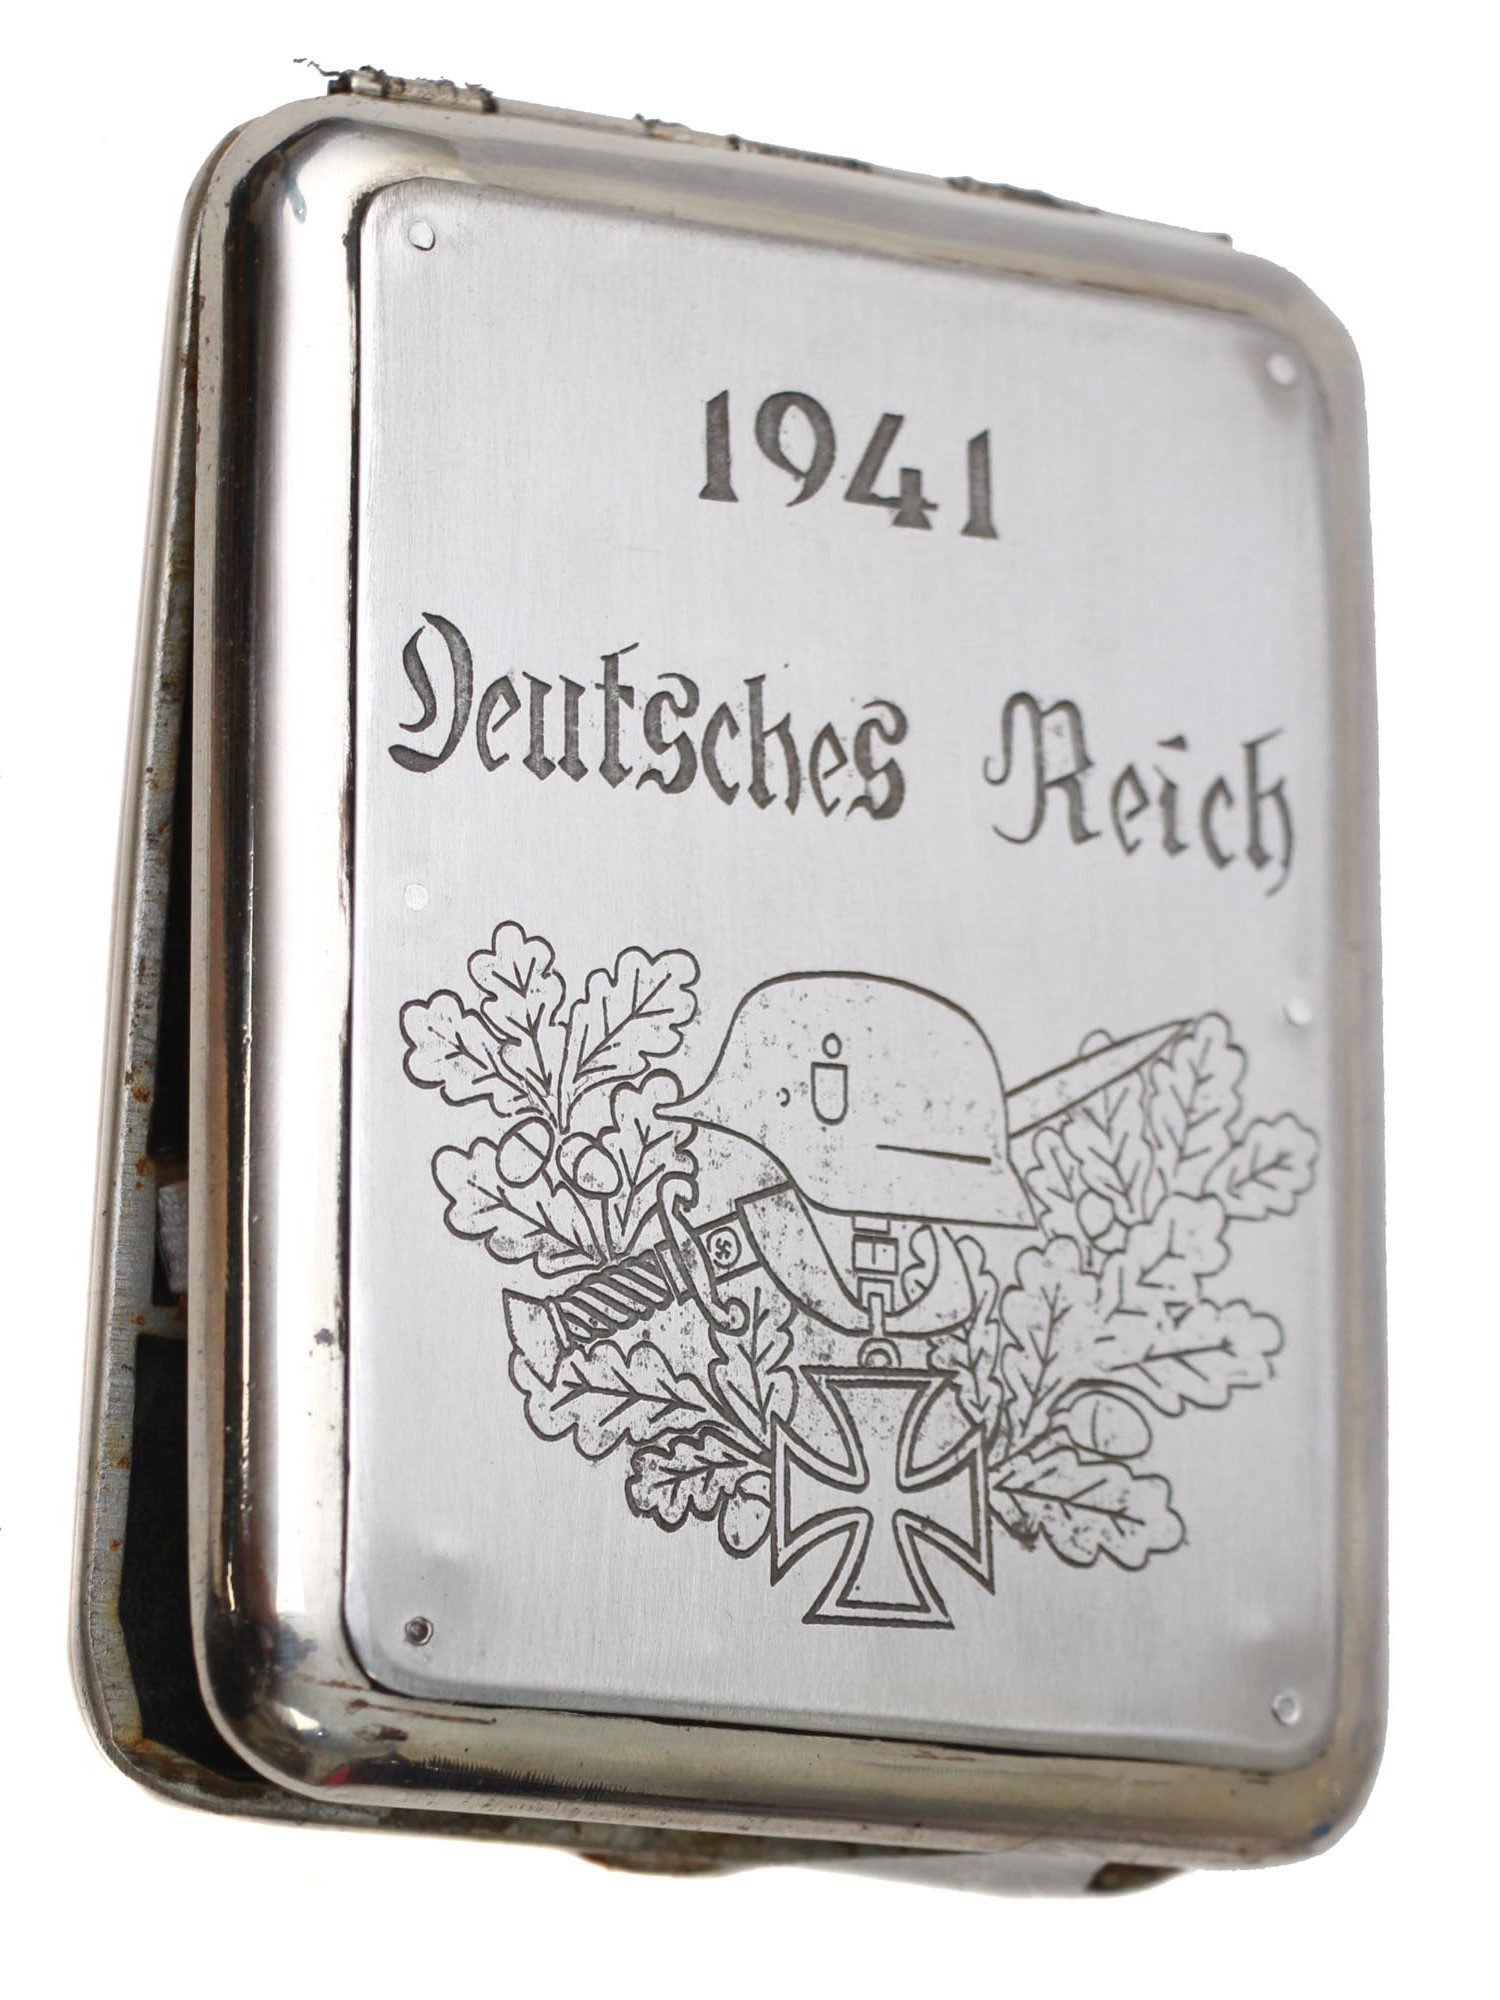 A WWII GERMAN ARMY HEER IRON CROSS CIGARETTE CASE PIC-0